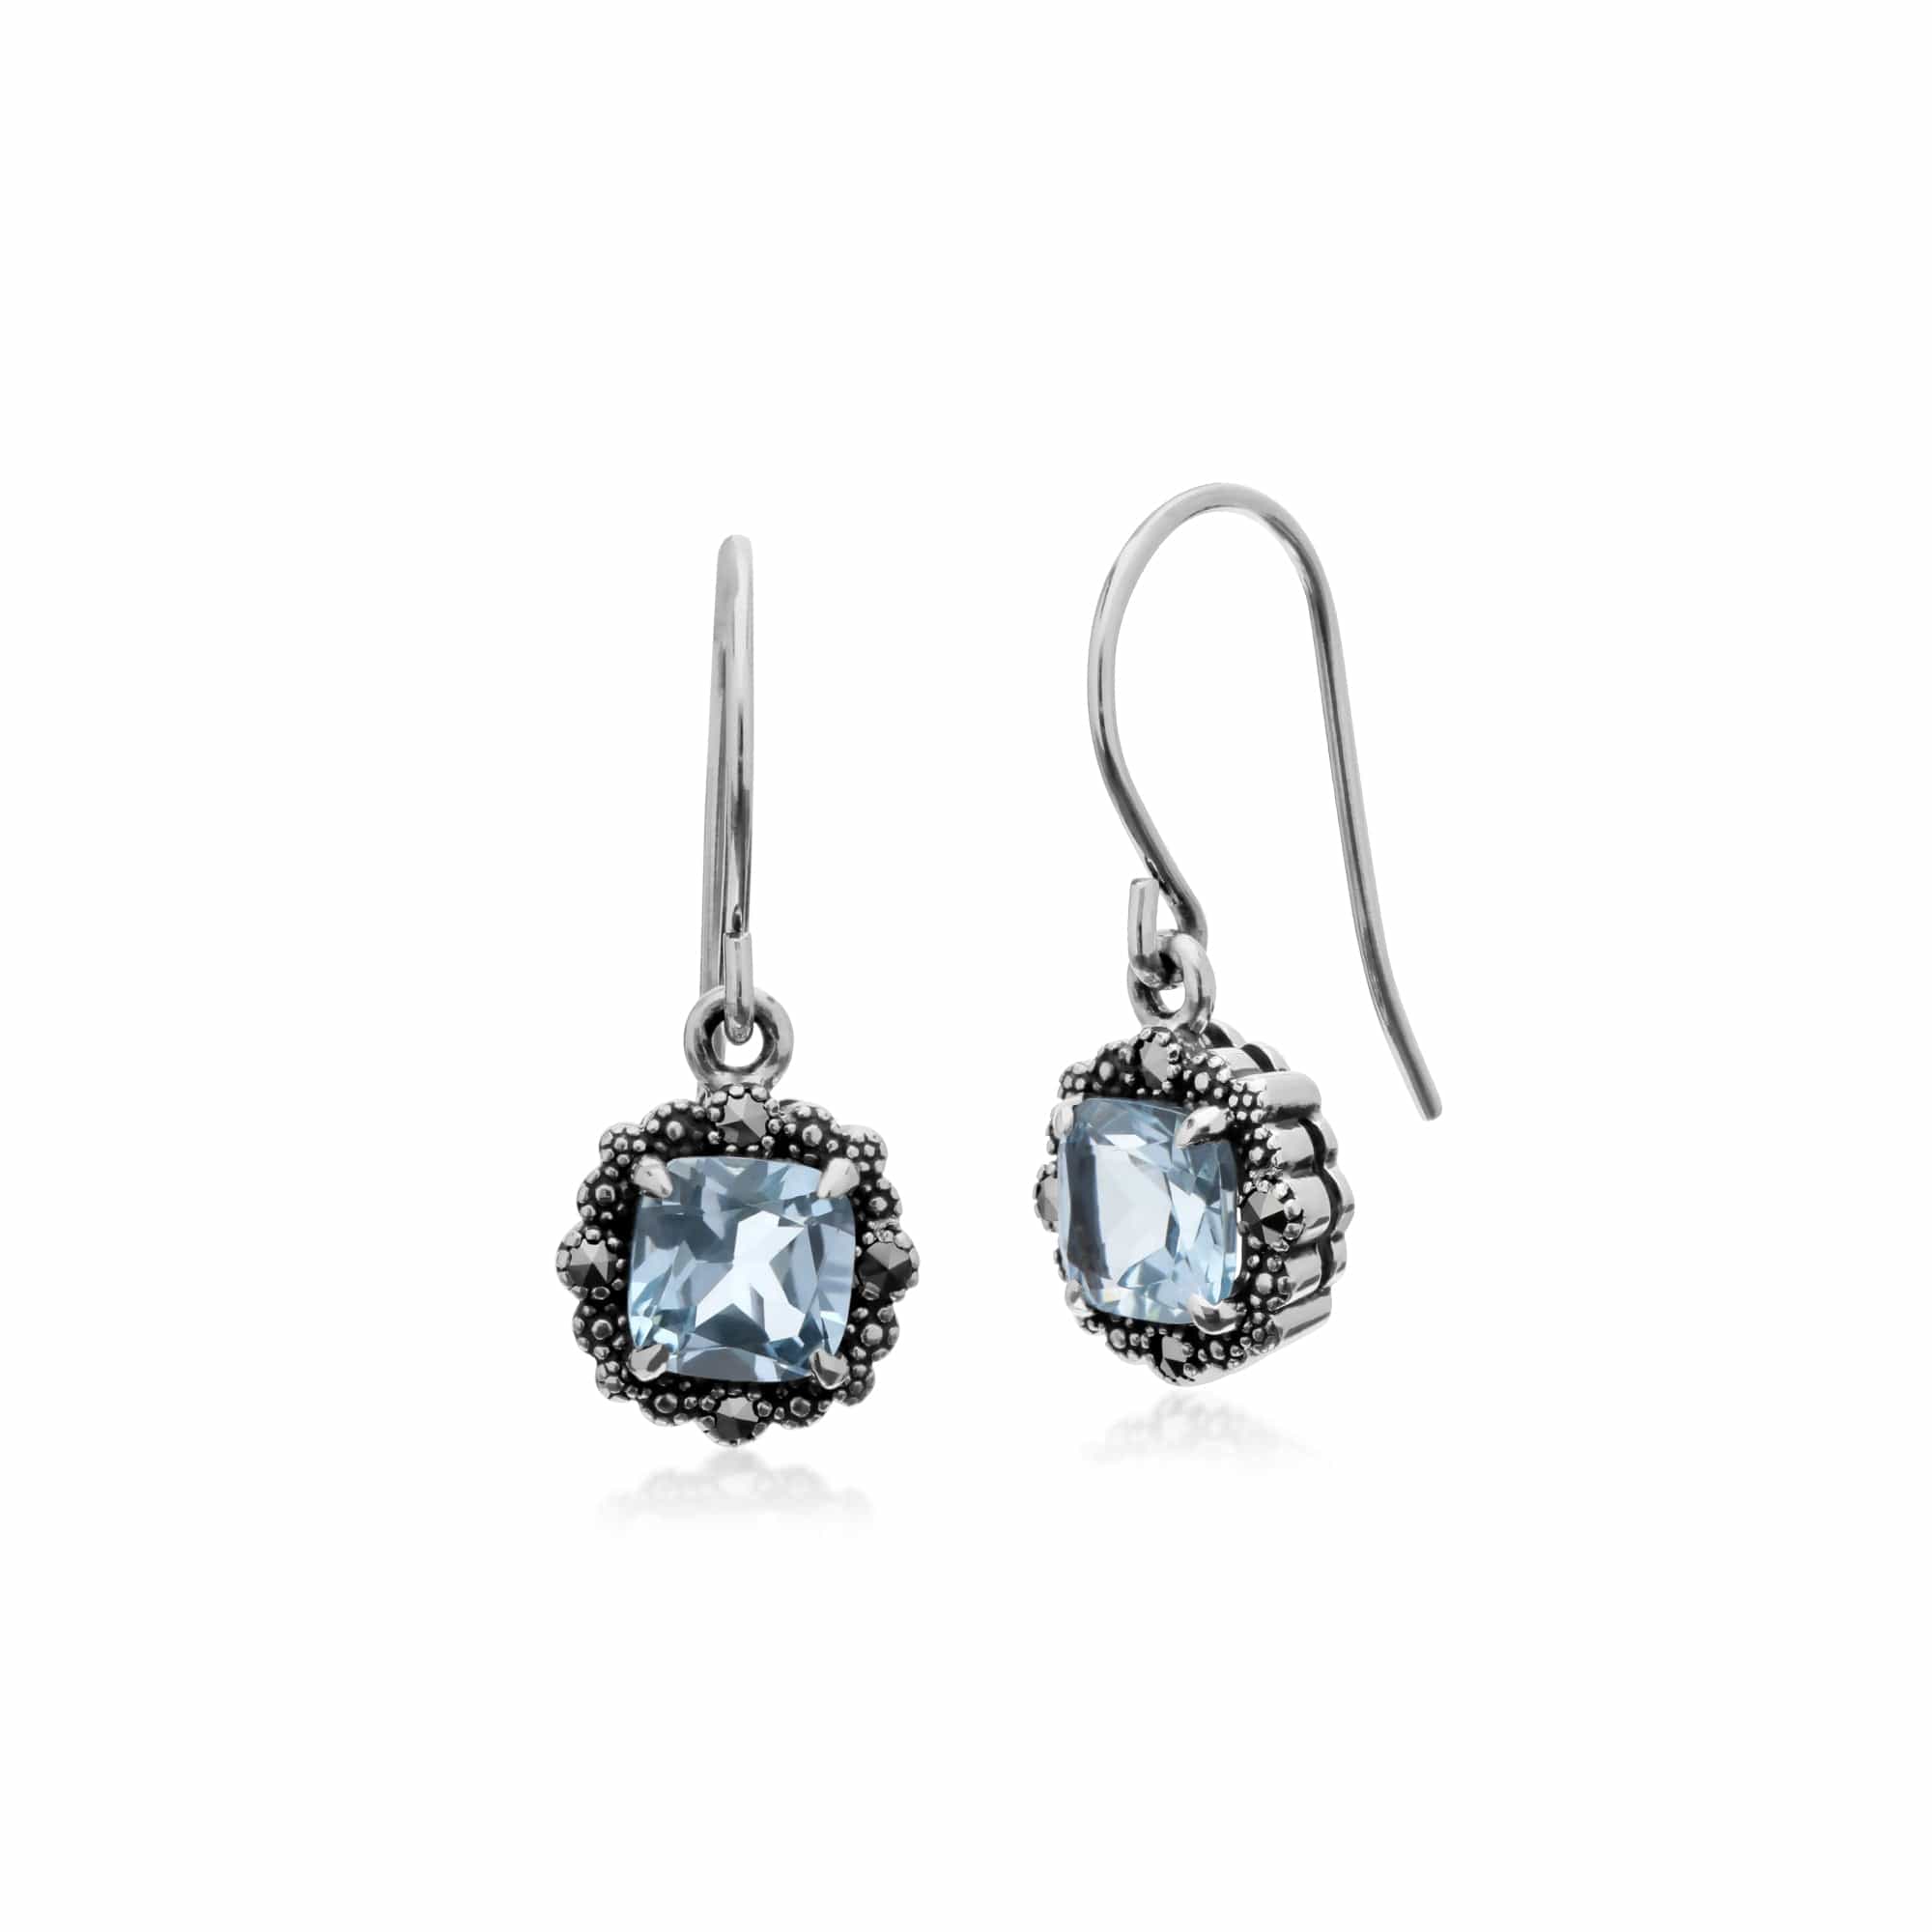 214E870901925 Art Deco Style Square Cushion Blue Topaz & Marcasite Drop Earrings in 925 Sterling Silver 1